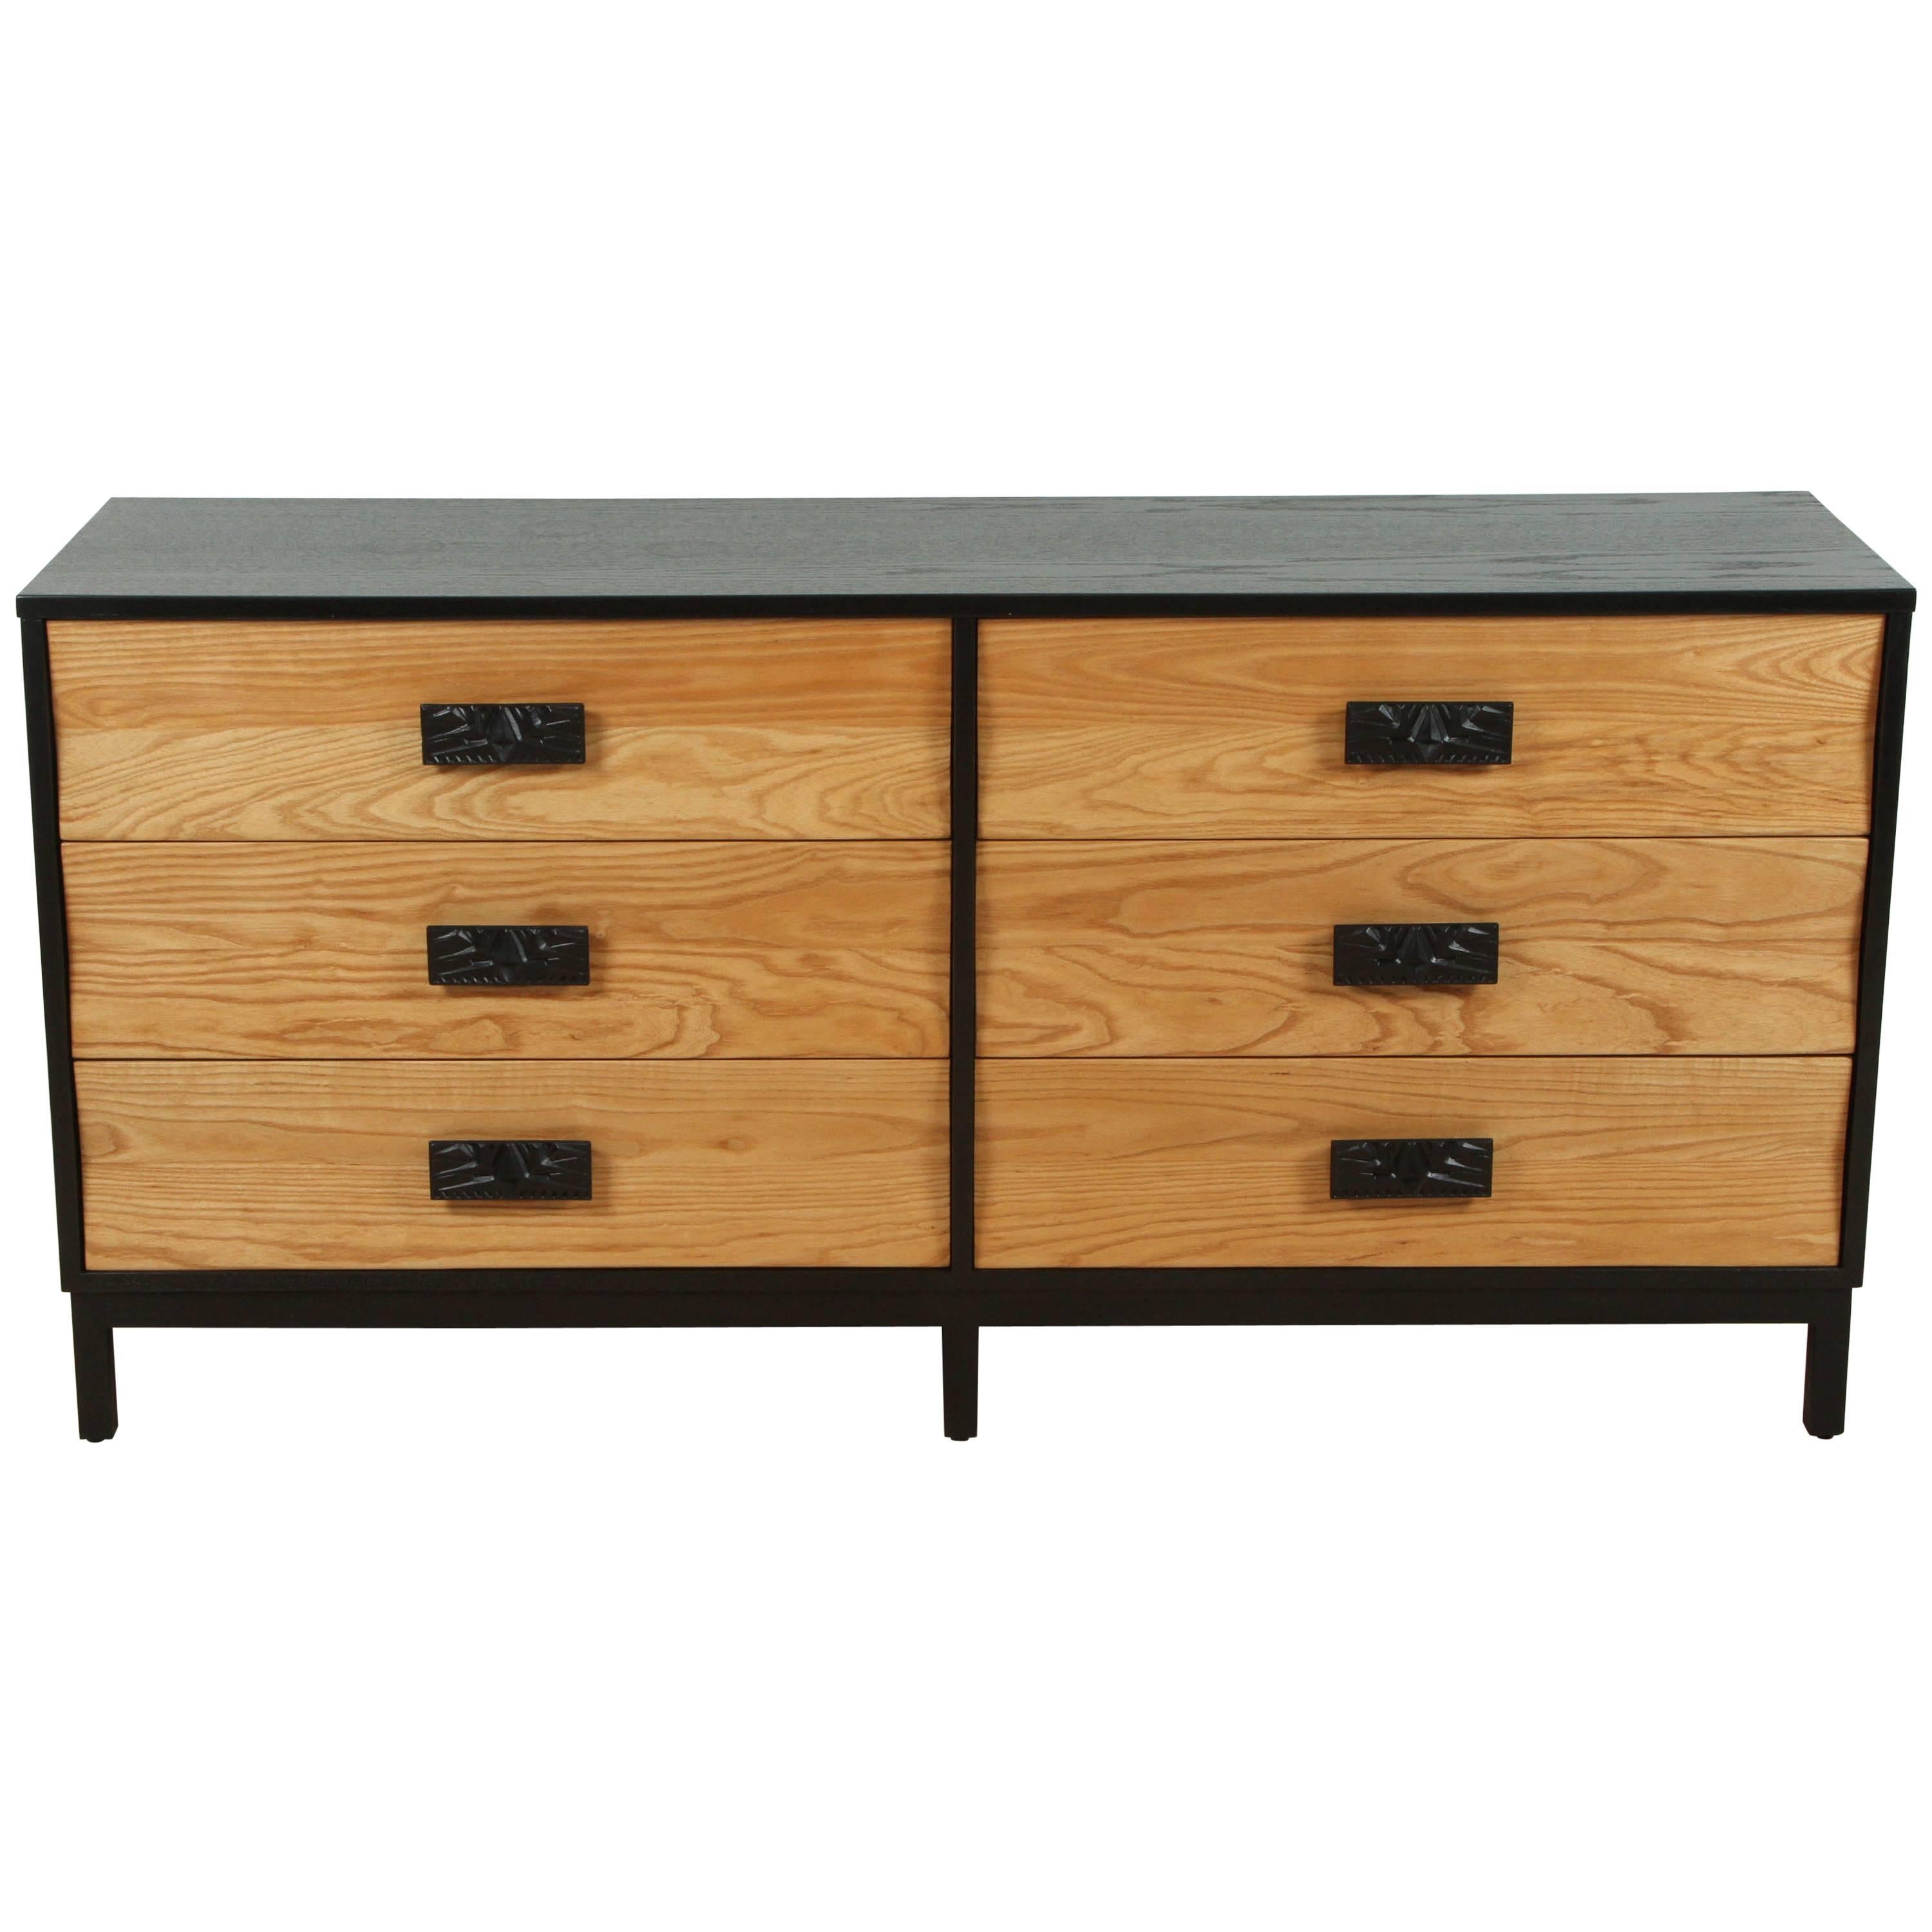 Rare Dunbar Dresser Commissioned by Frank Loyd Wright for the Arizona Biltmore